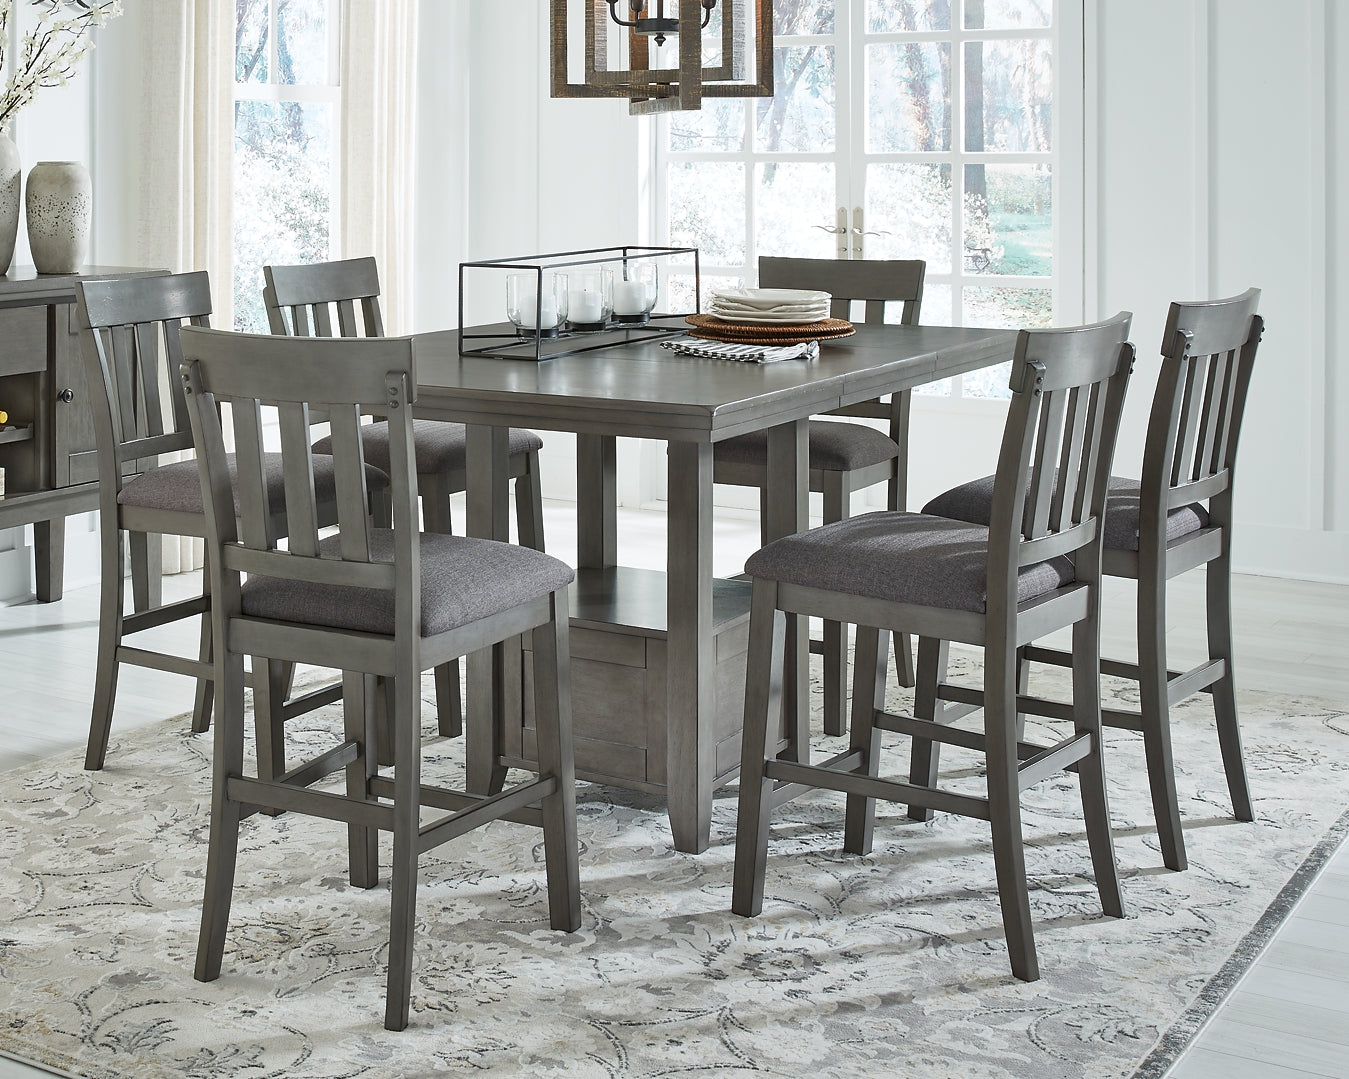 Hallanden Counter Height Dining Table and 6 Barstools JB's Furniture  Home Furniture, Home Decor, Furniture Store